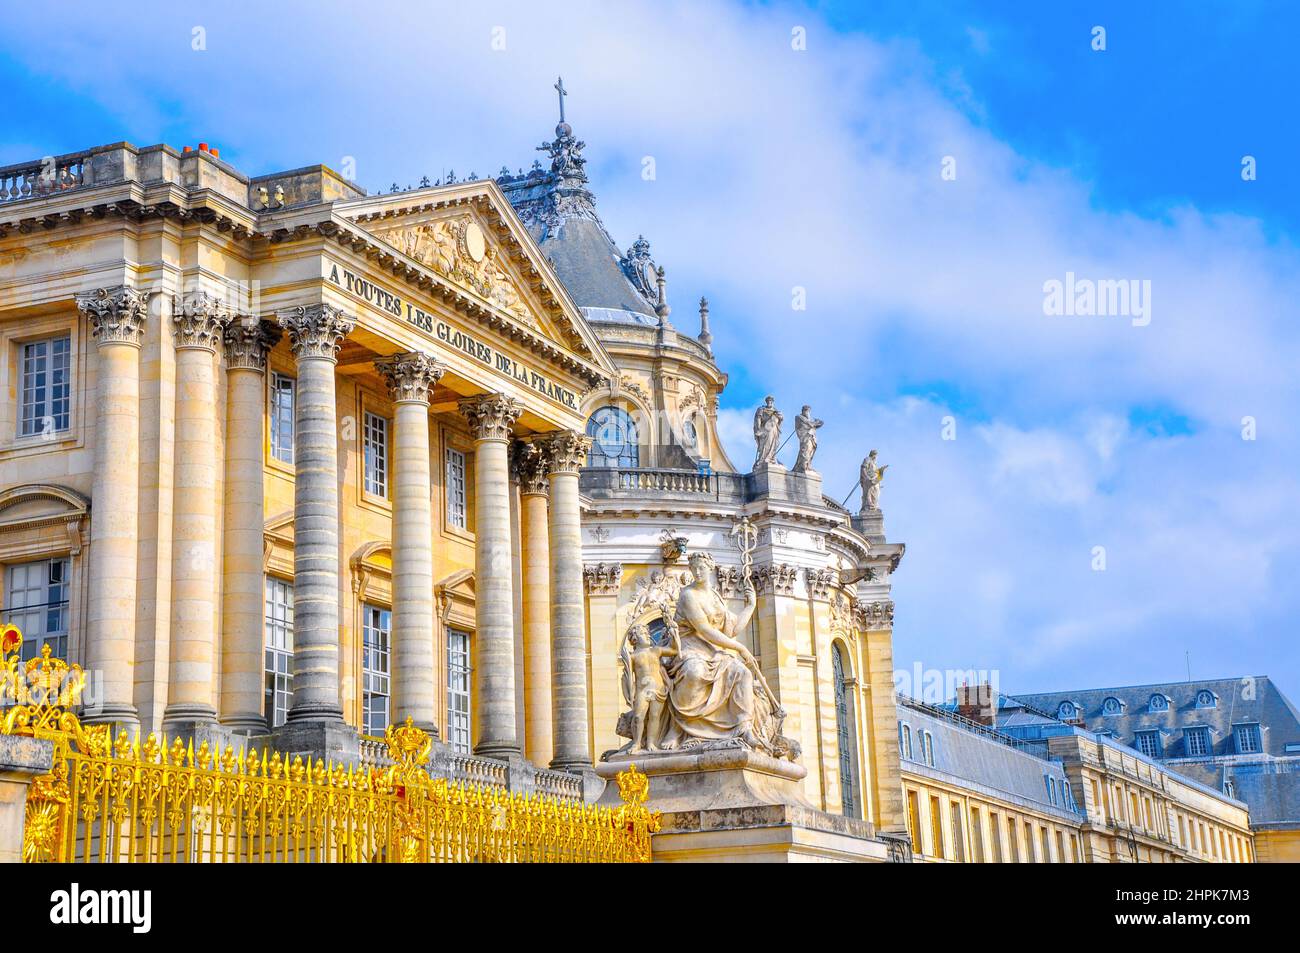 View of the beautiful facade of the Palace of Versailles in a bright sunny day Stock Photo